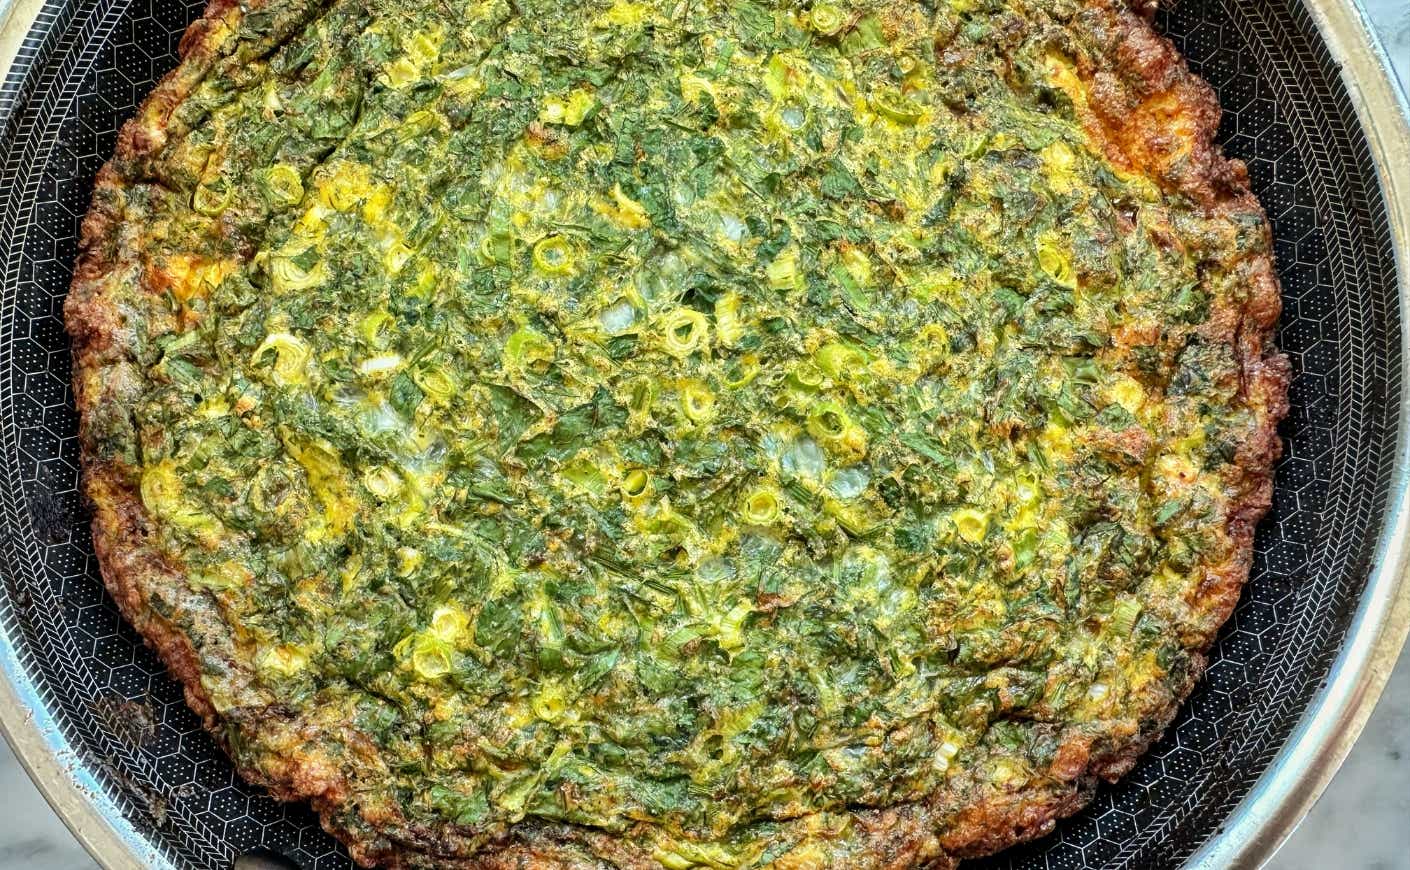 An herby cottage cheese frittata.